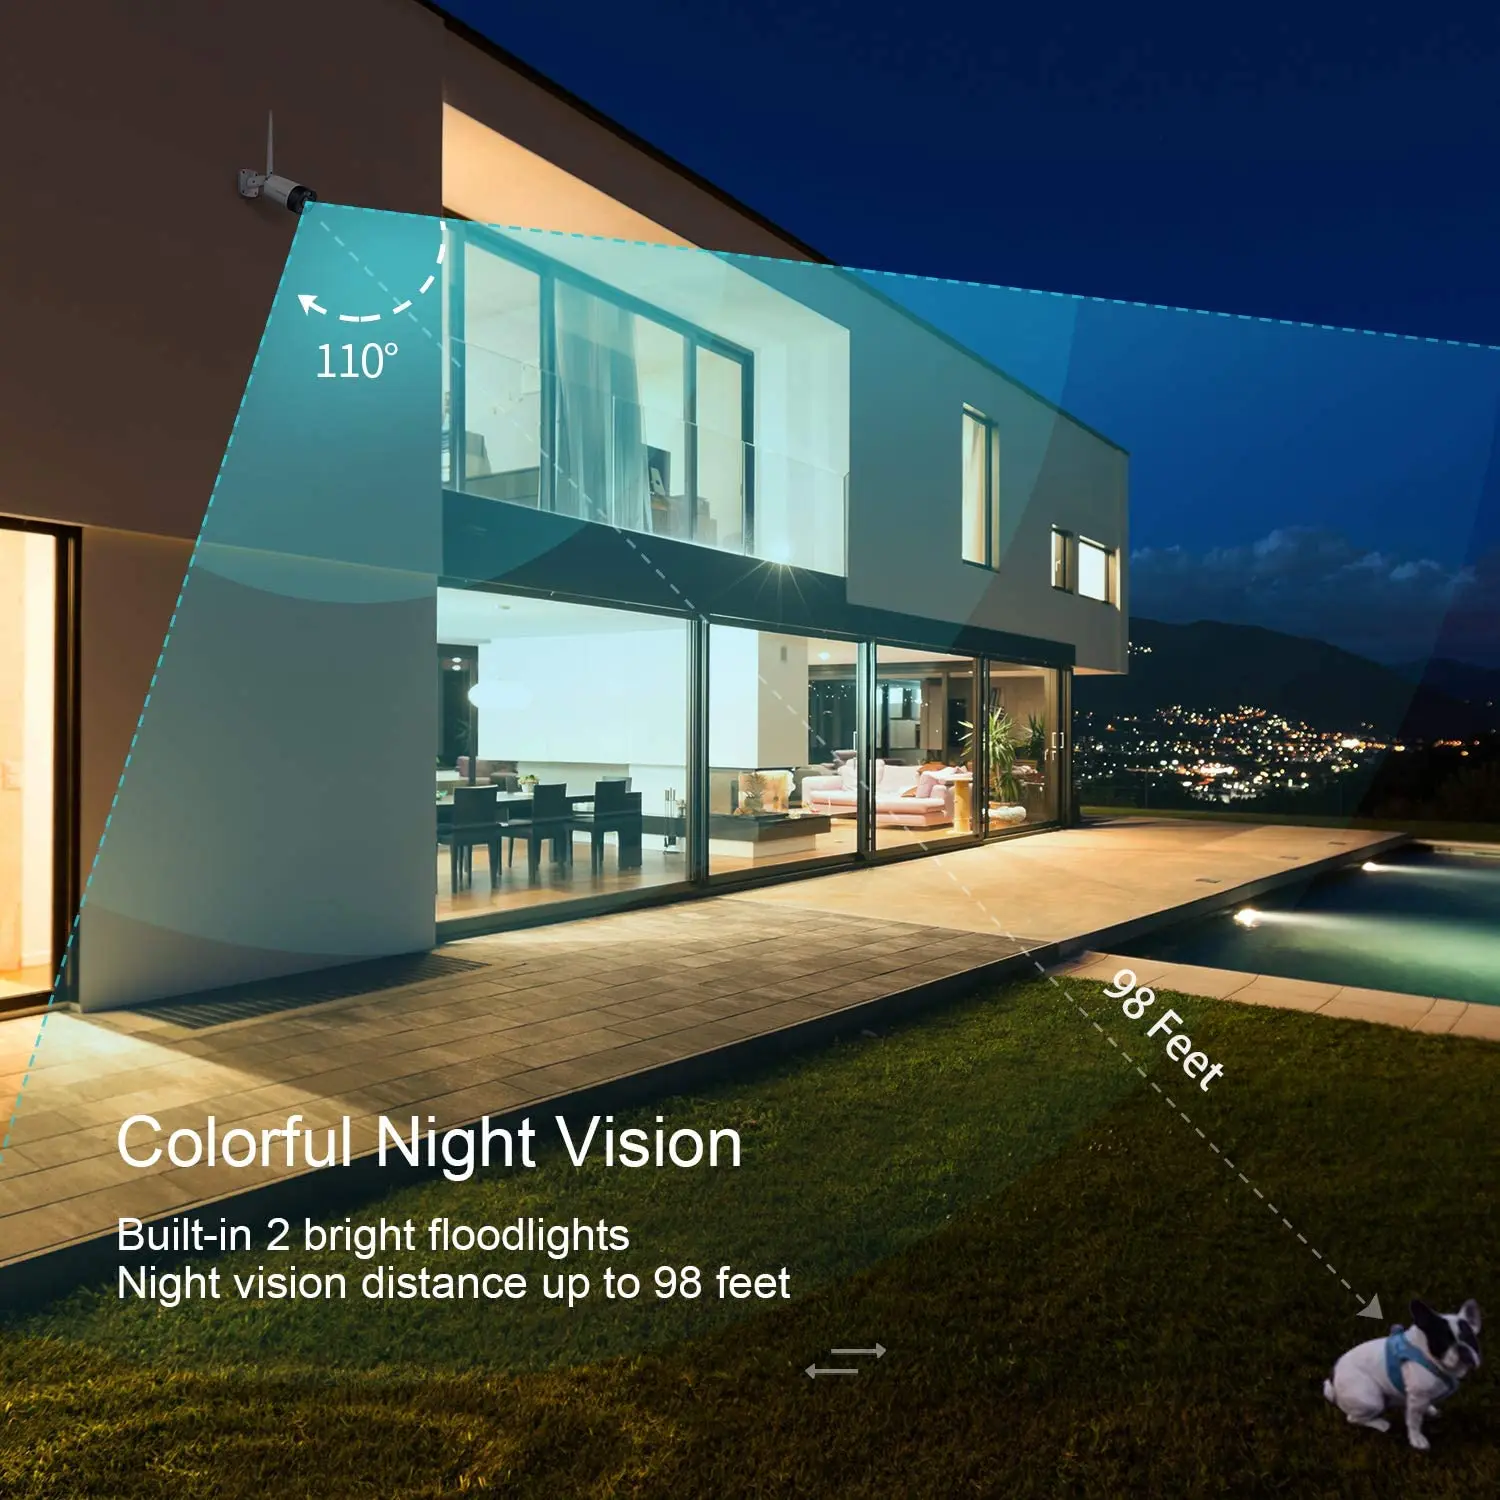 Motion Message Alerts HM311 Weatherproof Colored Night Vision HeimVision 3MP Outdoor Camera Wireless 1296P 2K Security Camera Outdoor with Floodlight 2-Way Audio Sound Human Detection Alarm